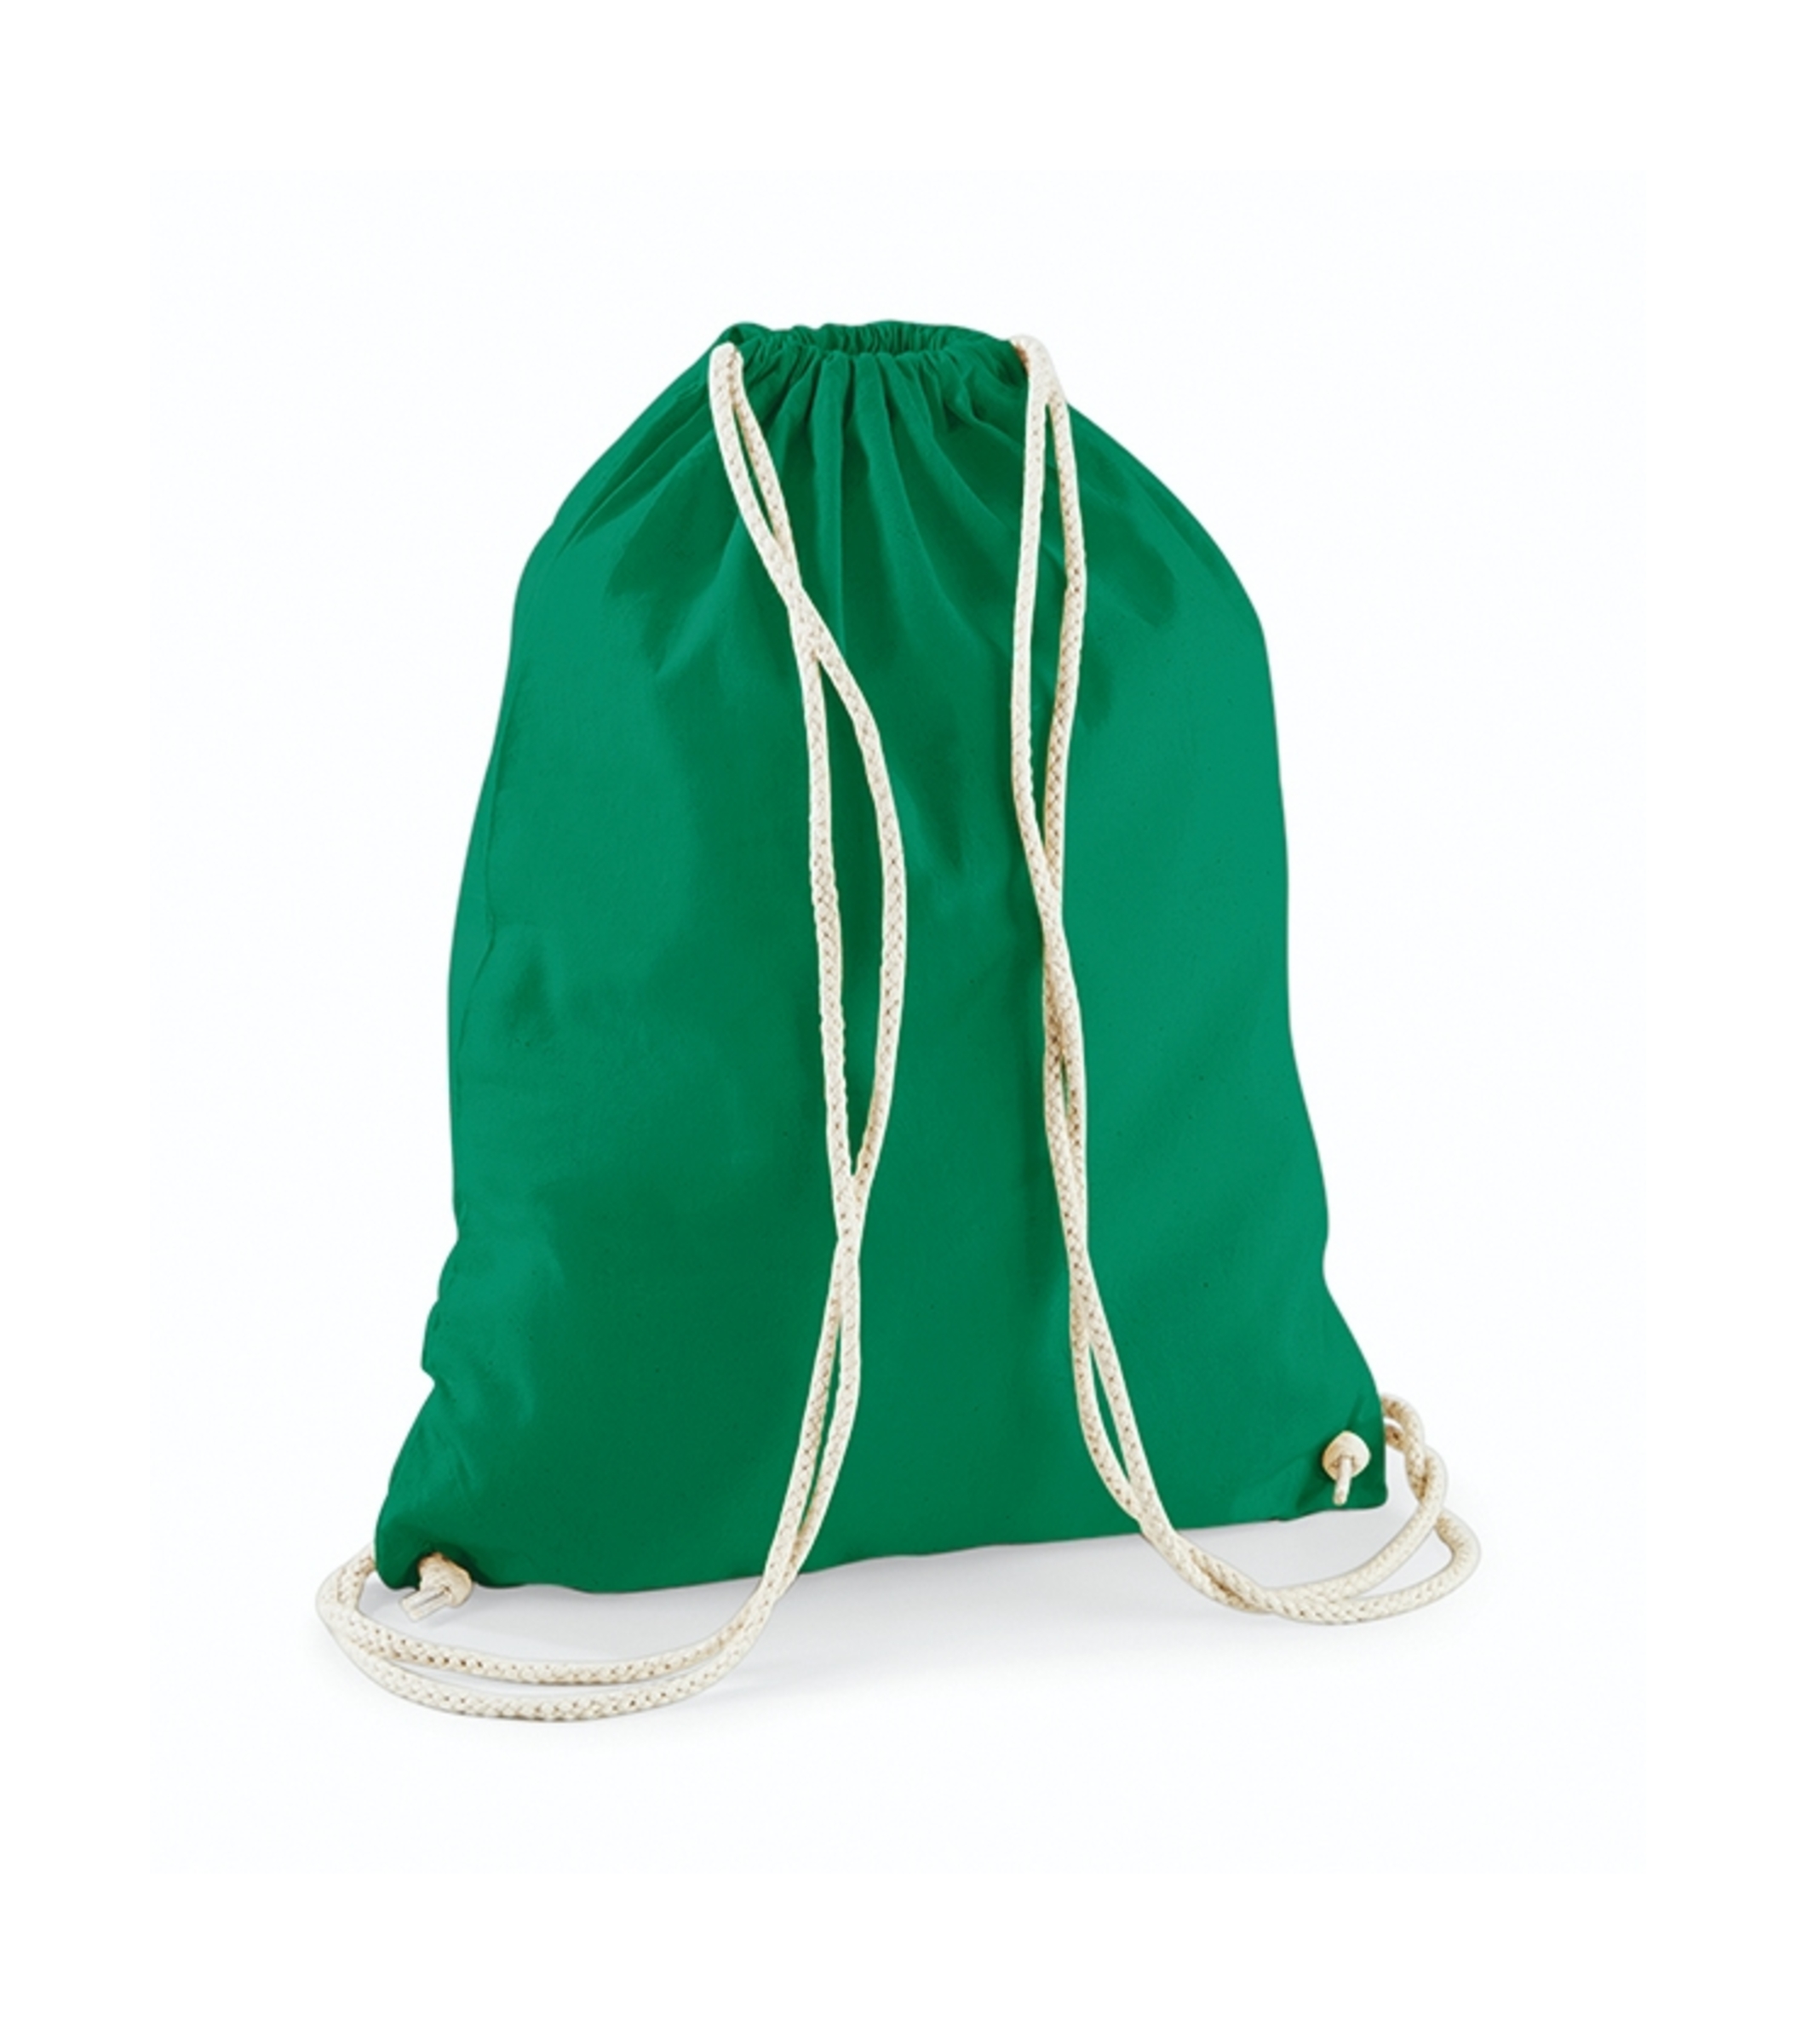 Westford Mill Cotton Gymsack - Kelly Green - One Size